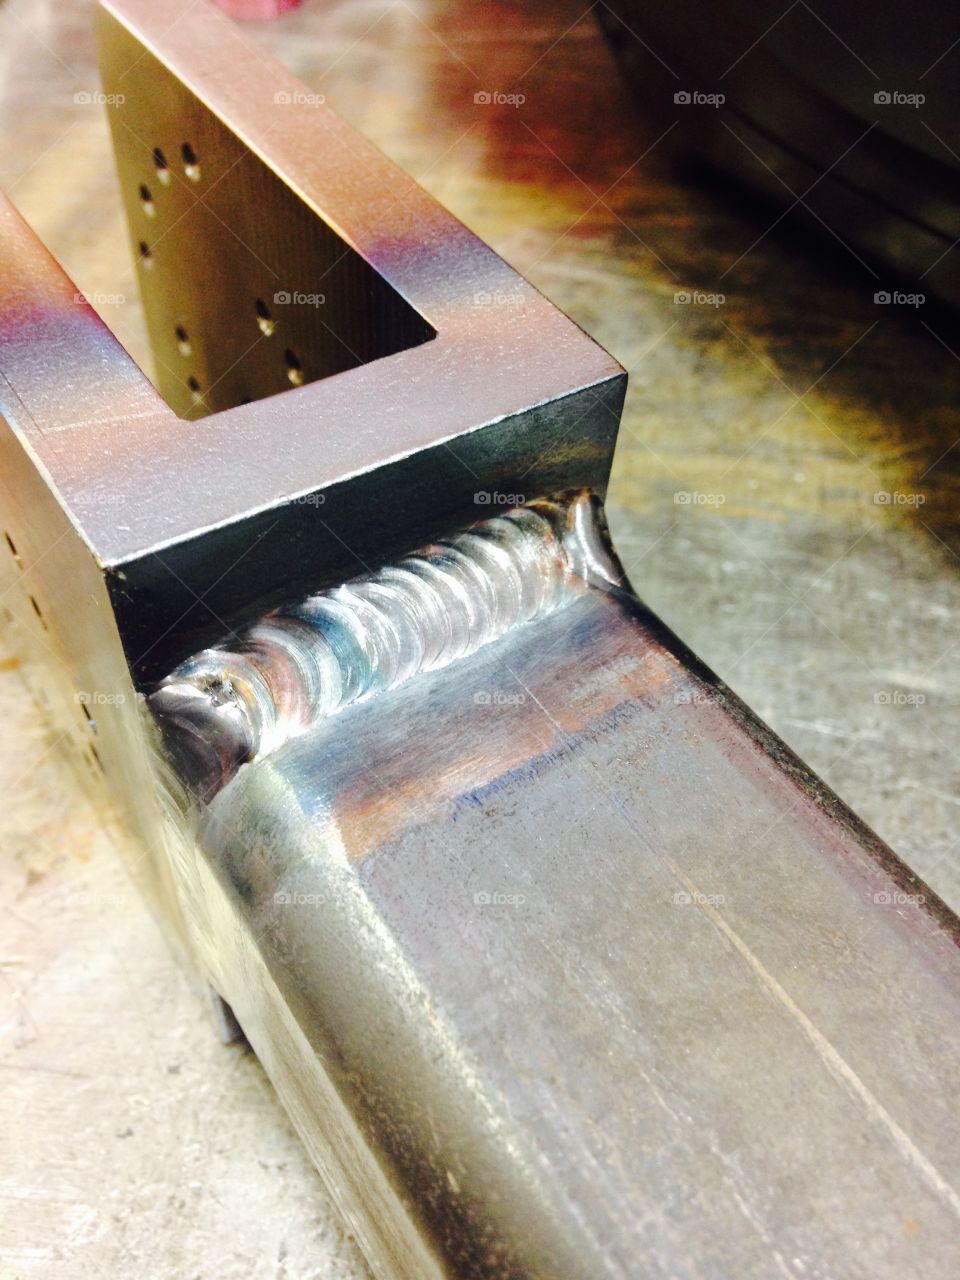 Welds together